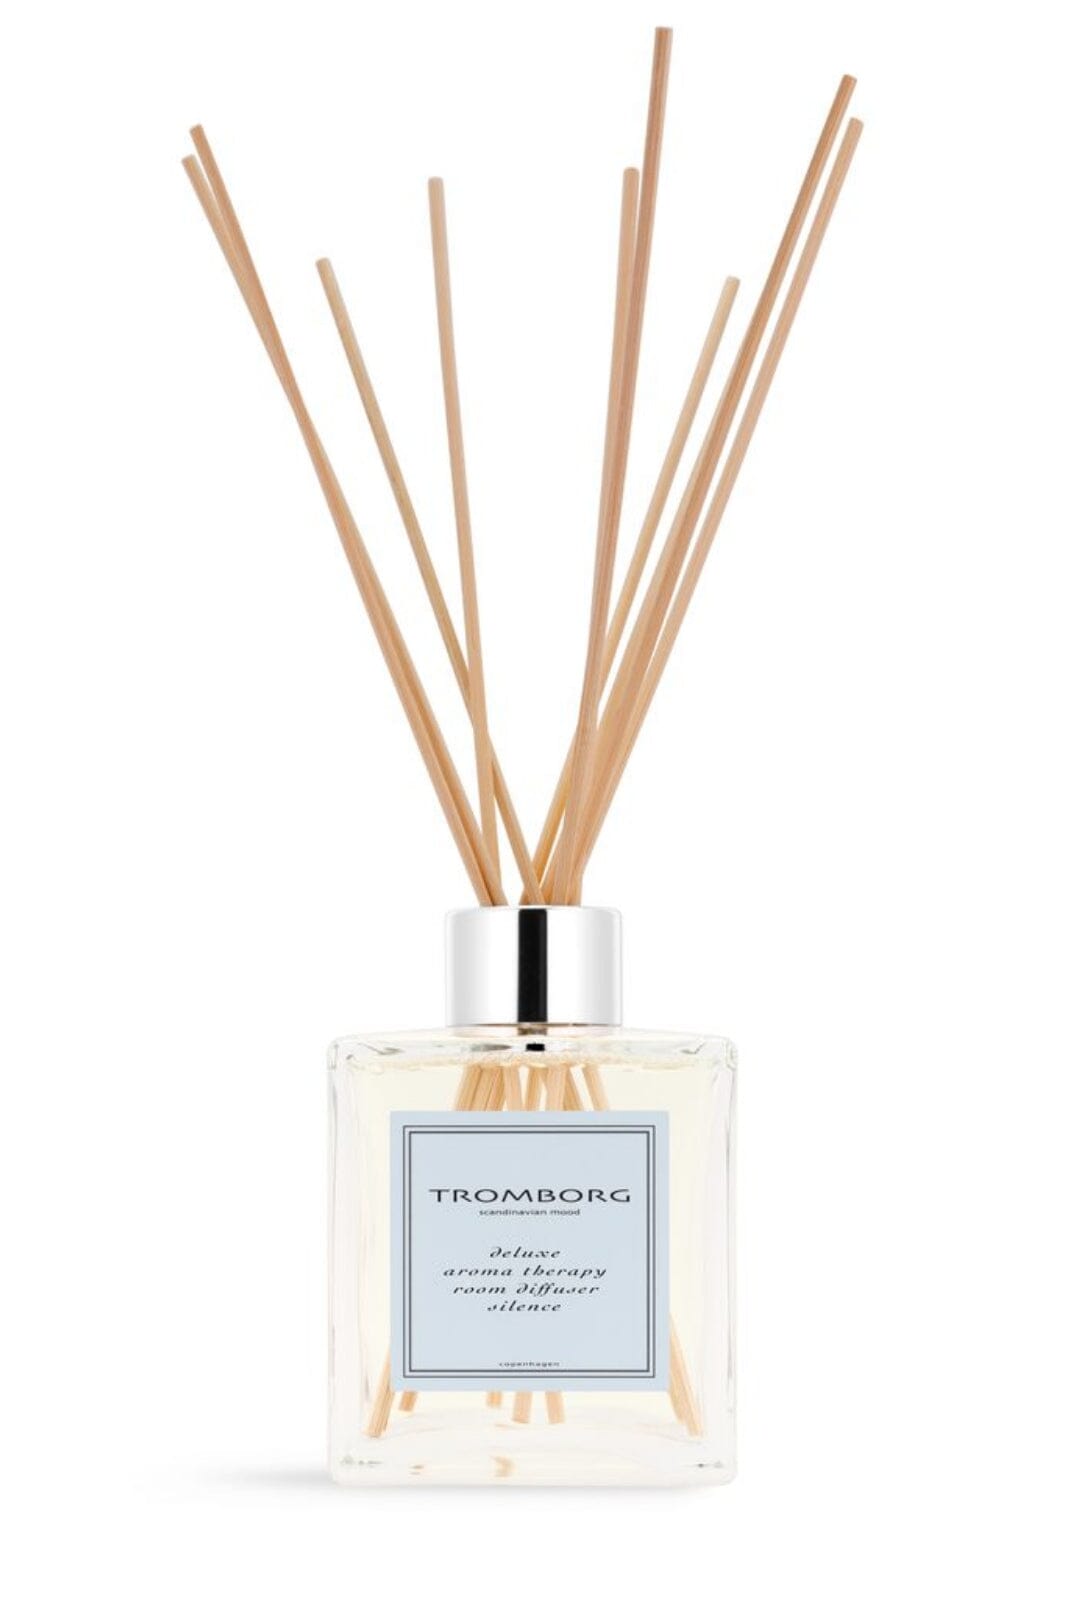 Tromborg - Aroma Therapy Room Diffuser Silence Duftfrisker 